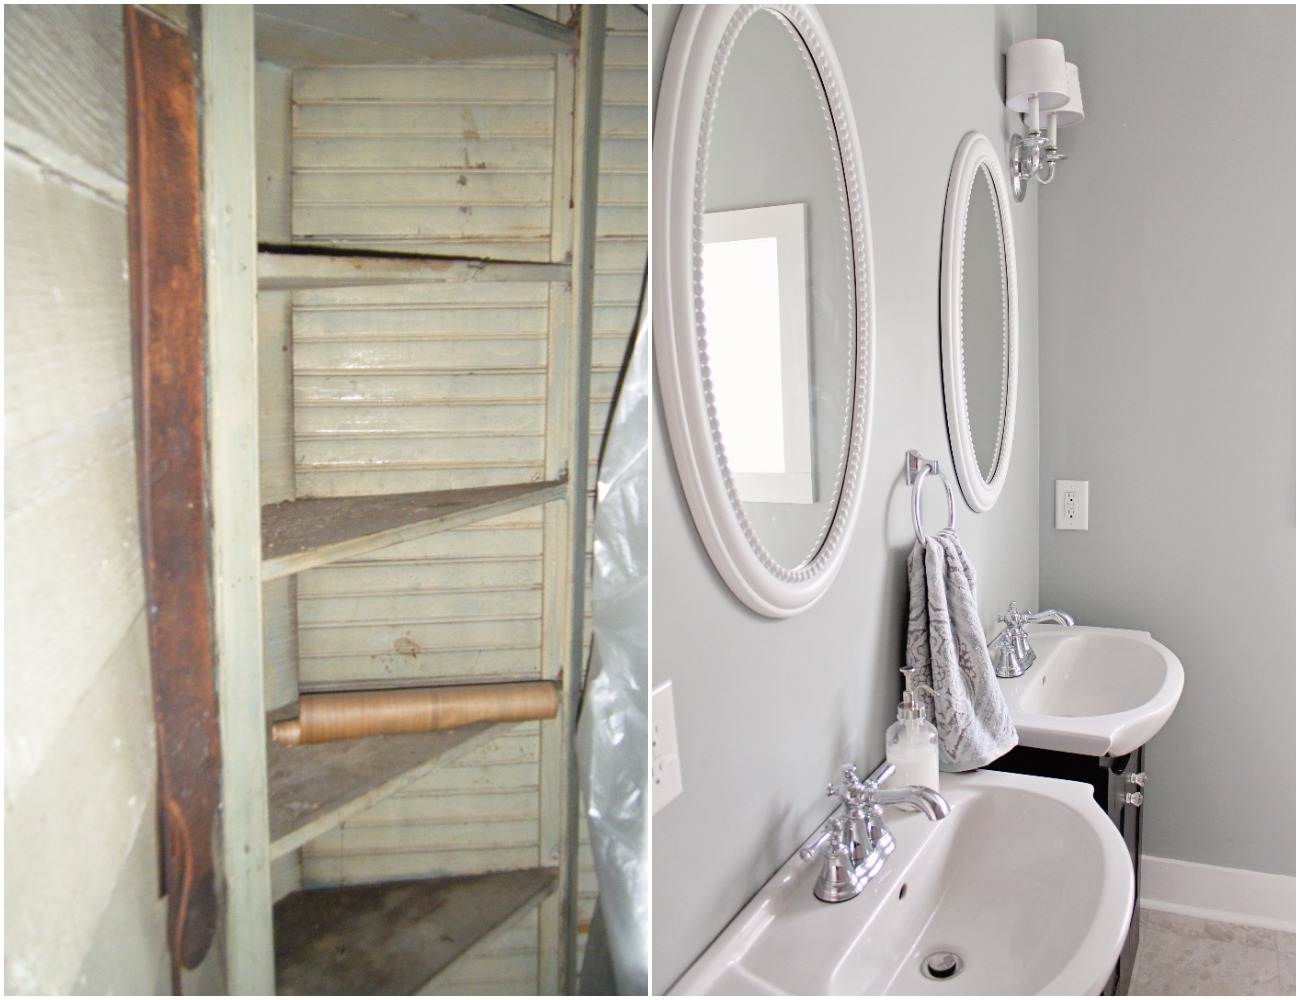 Elizabeth Burns Design  Budget-Friendly Fixer Upper Farmhouse Before and After House Flip - DIY Small Master Bathroom with Two Sinks and Subway Tile - Sherwin Williams Magnetic Gray (3).jpg